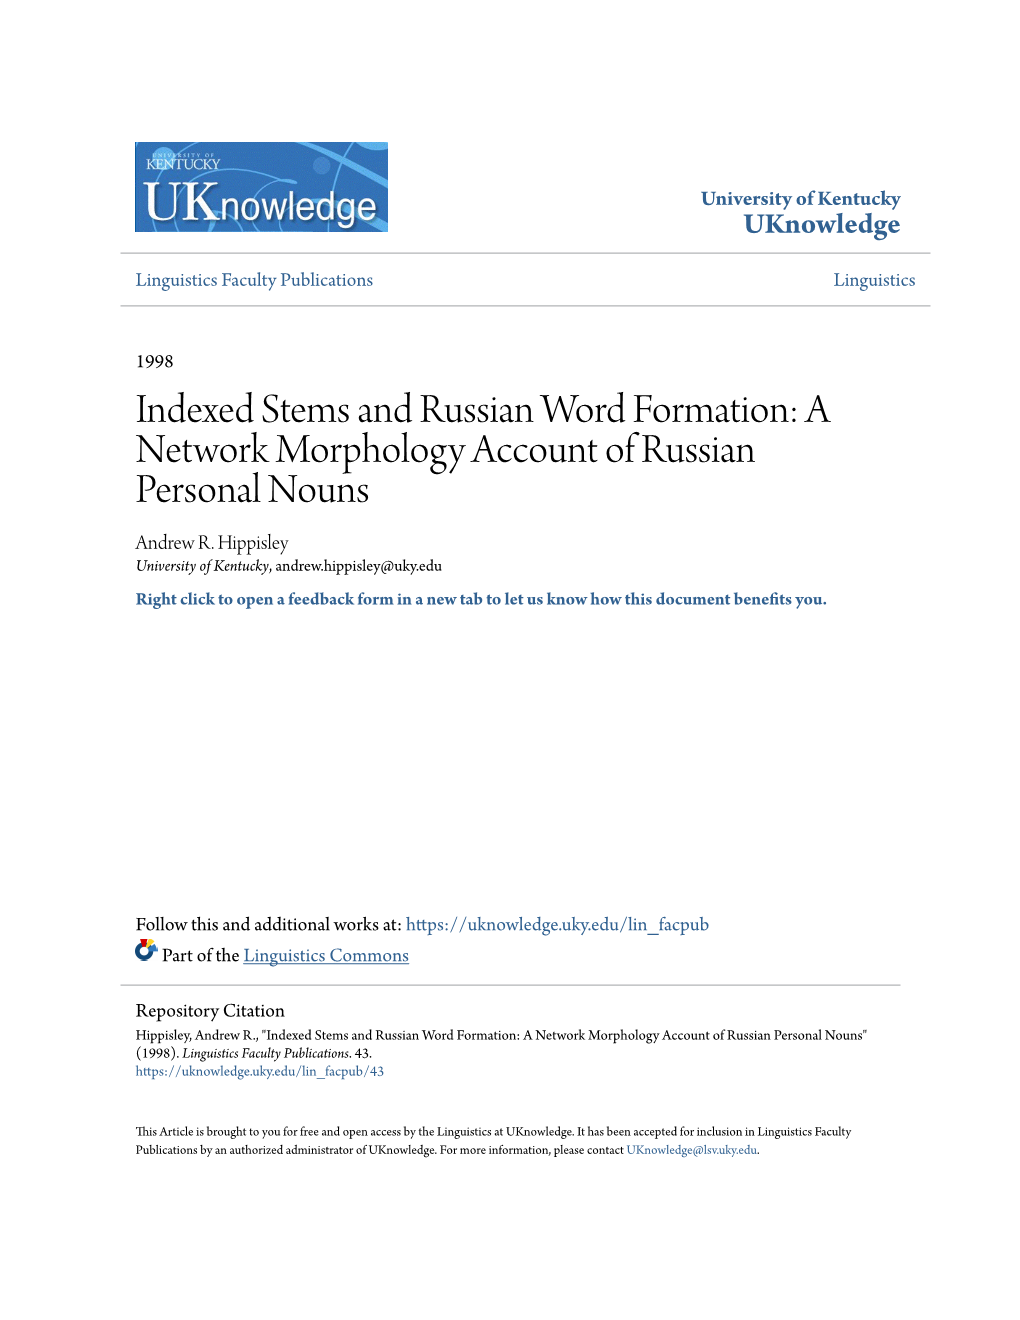 Indexed Stems and Russian Word Formation: a Network Morphology Account of Russian Personal Nouns Andrew R